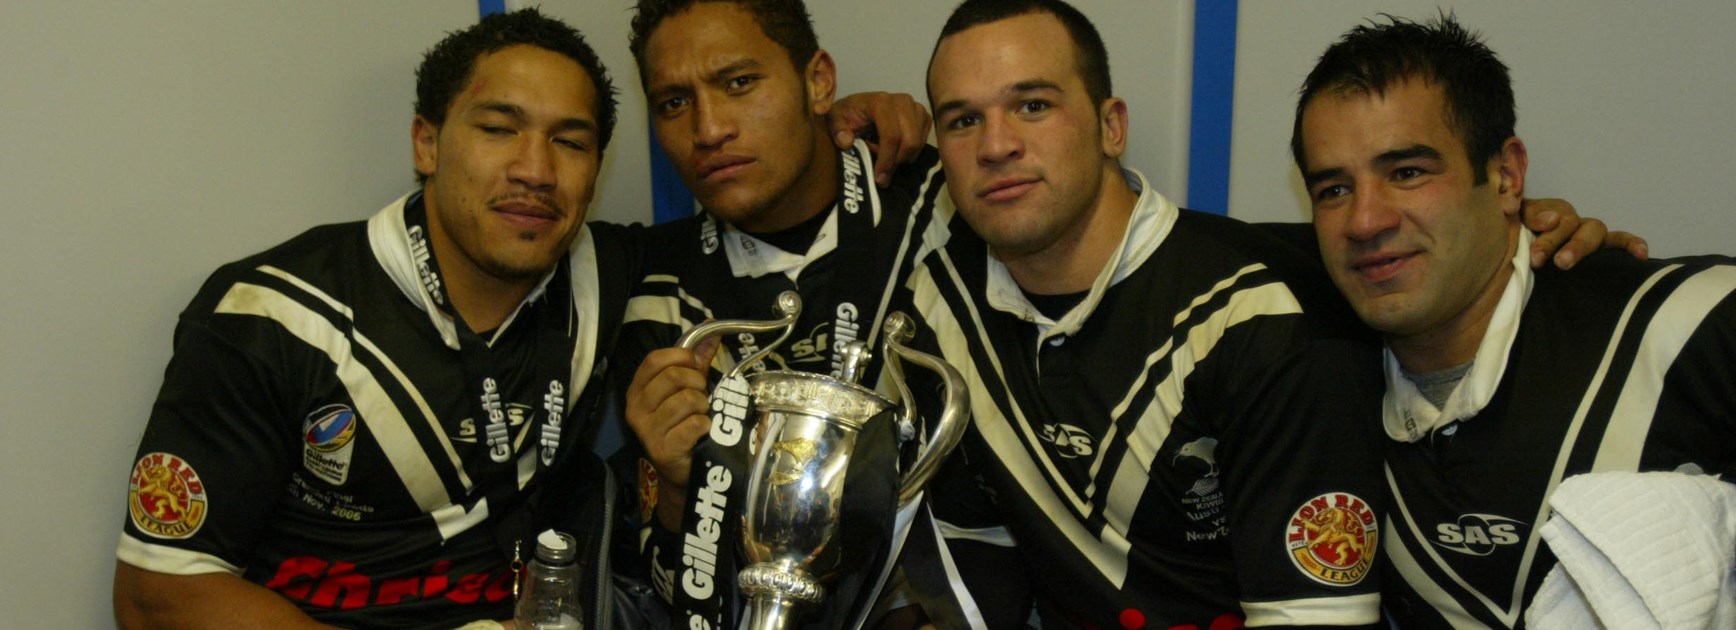 Kiwis players after the 2005 Tri Nations.